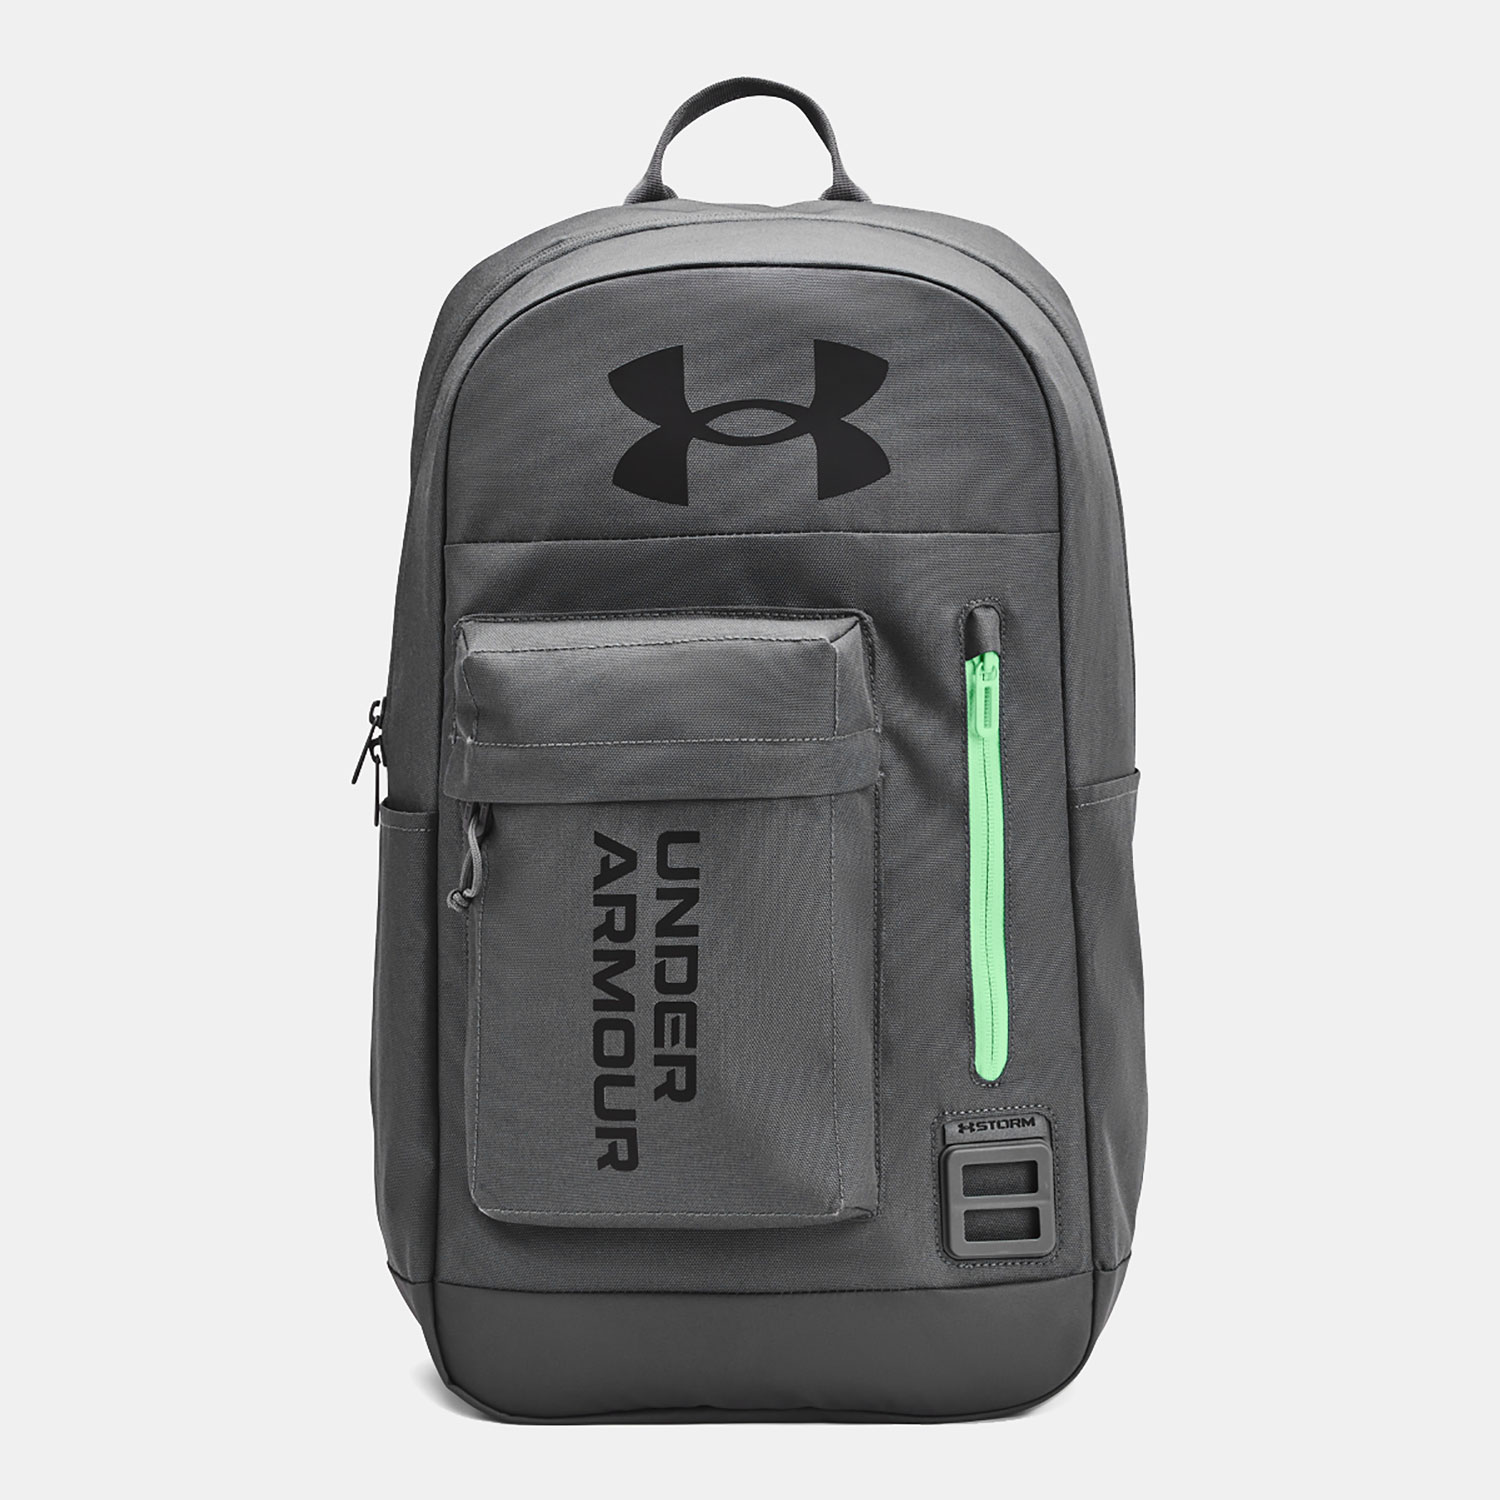 UNDER ARMOUR HALFTIME BACKPACK ΓΚΡΙ